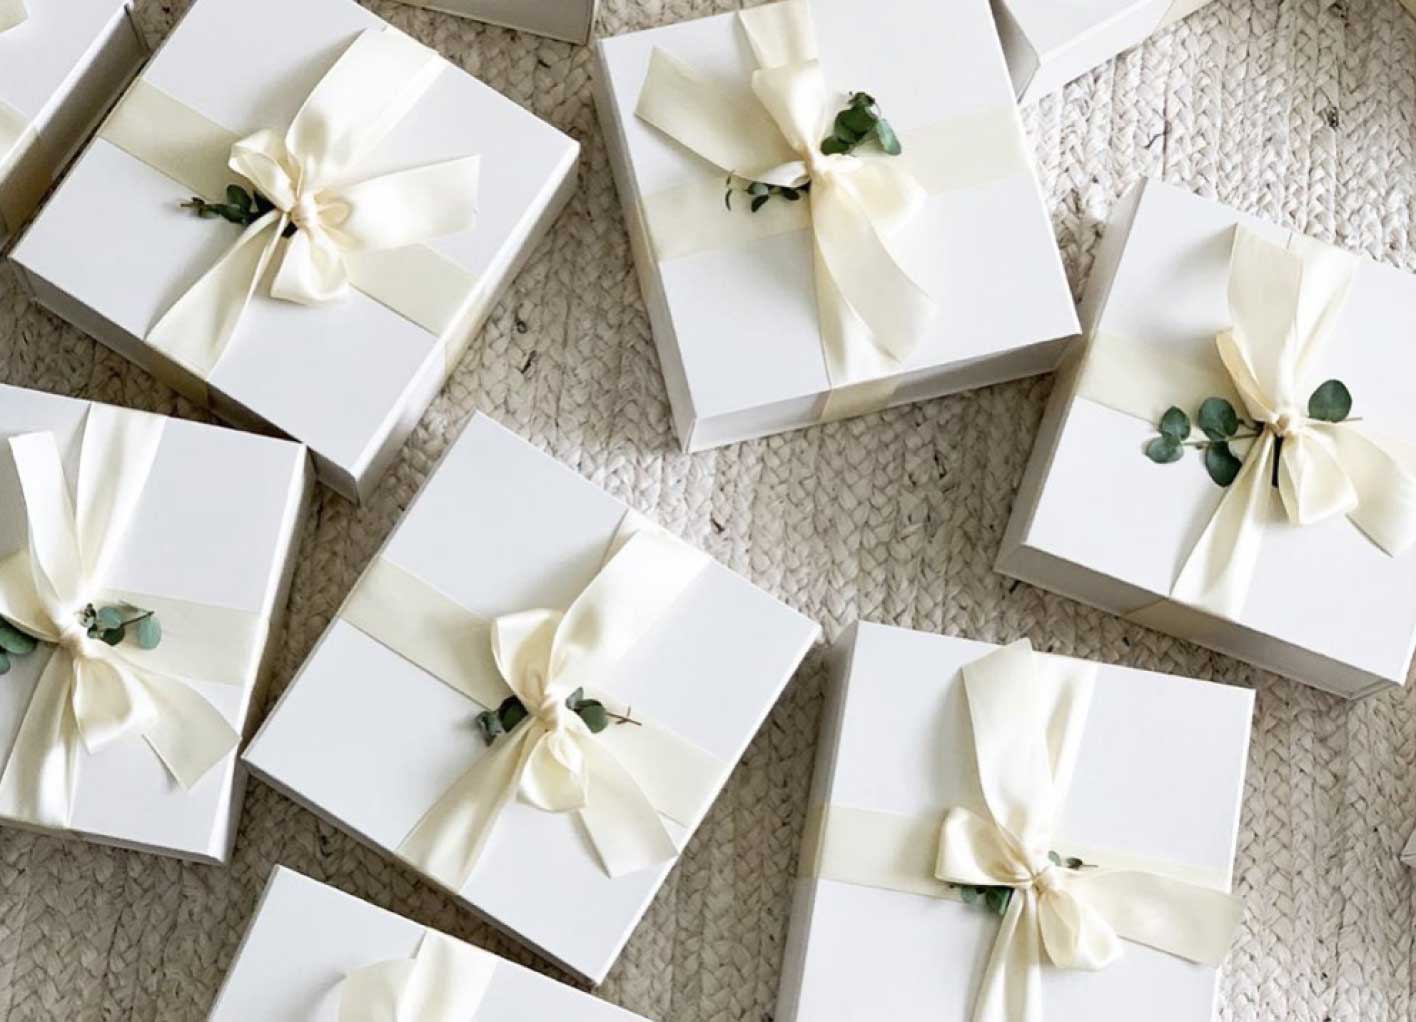 Is It Customary to Bring Wedding Gifts to a Reception?